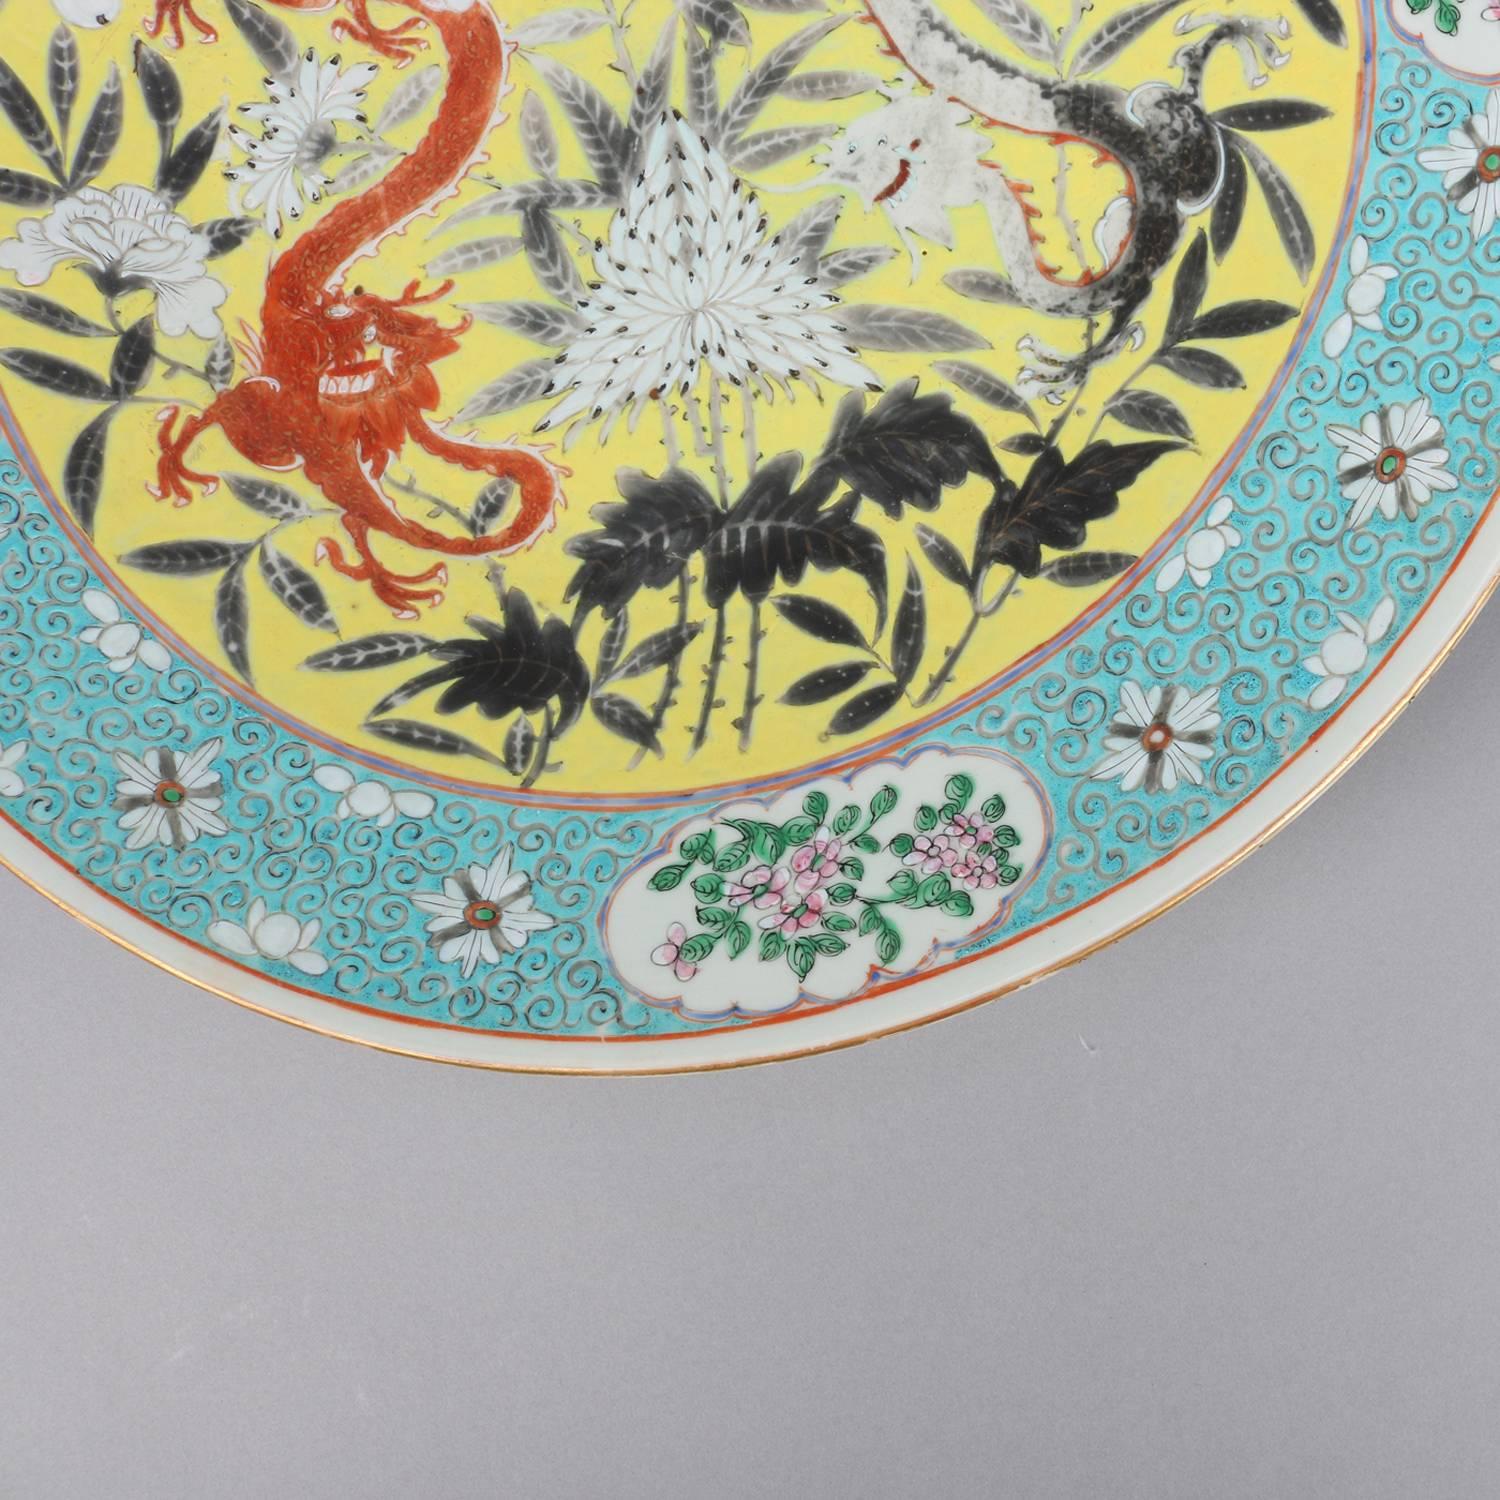 19th Century Chinese Export Famille Rose Enameled Porcelain Charger, Floral with Dragons